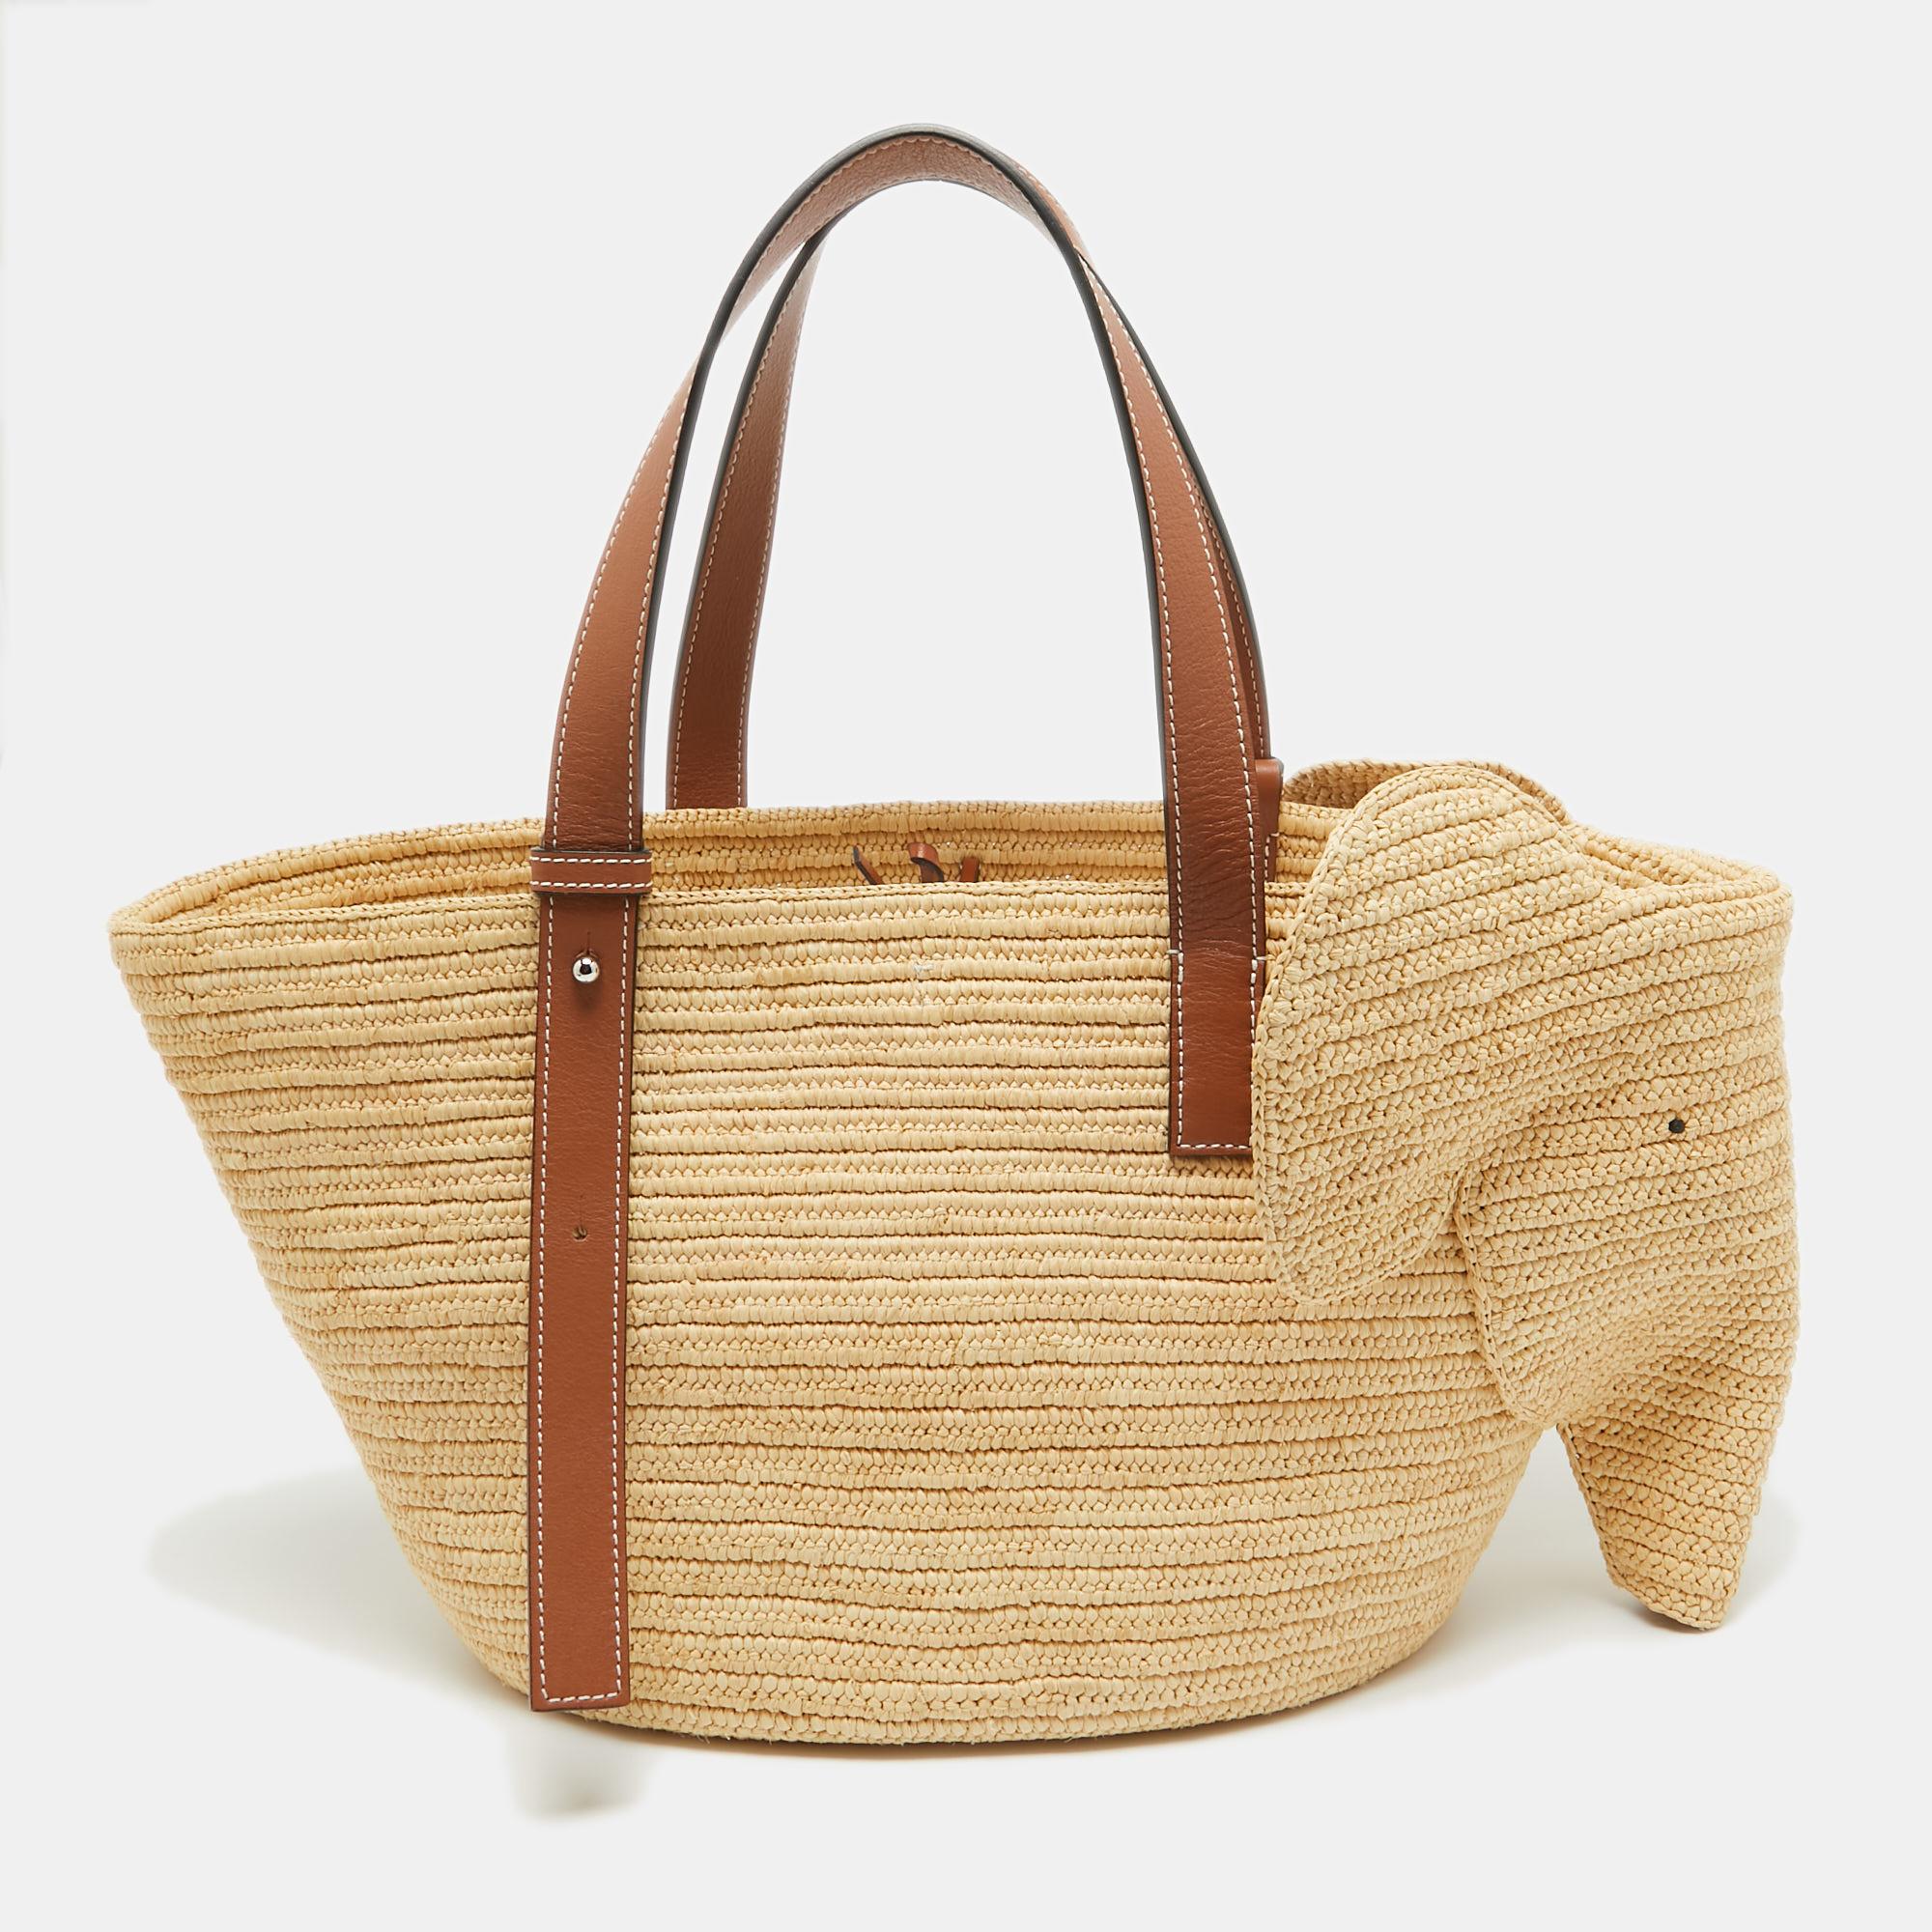 Women's Loewe Brown/Natural Palm Leaf and Leather Elephant Basket Tote